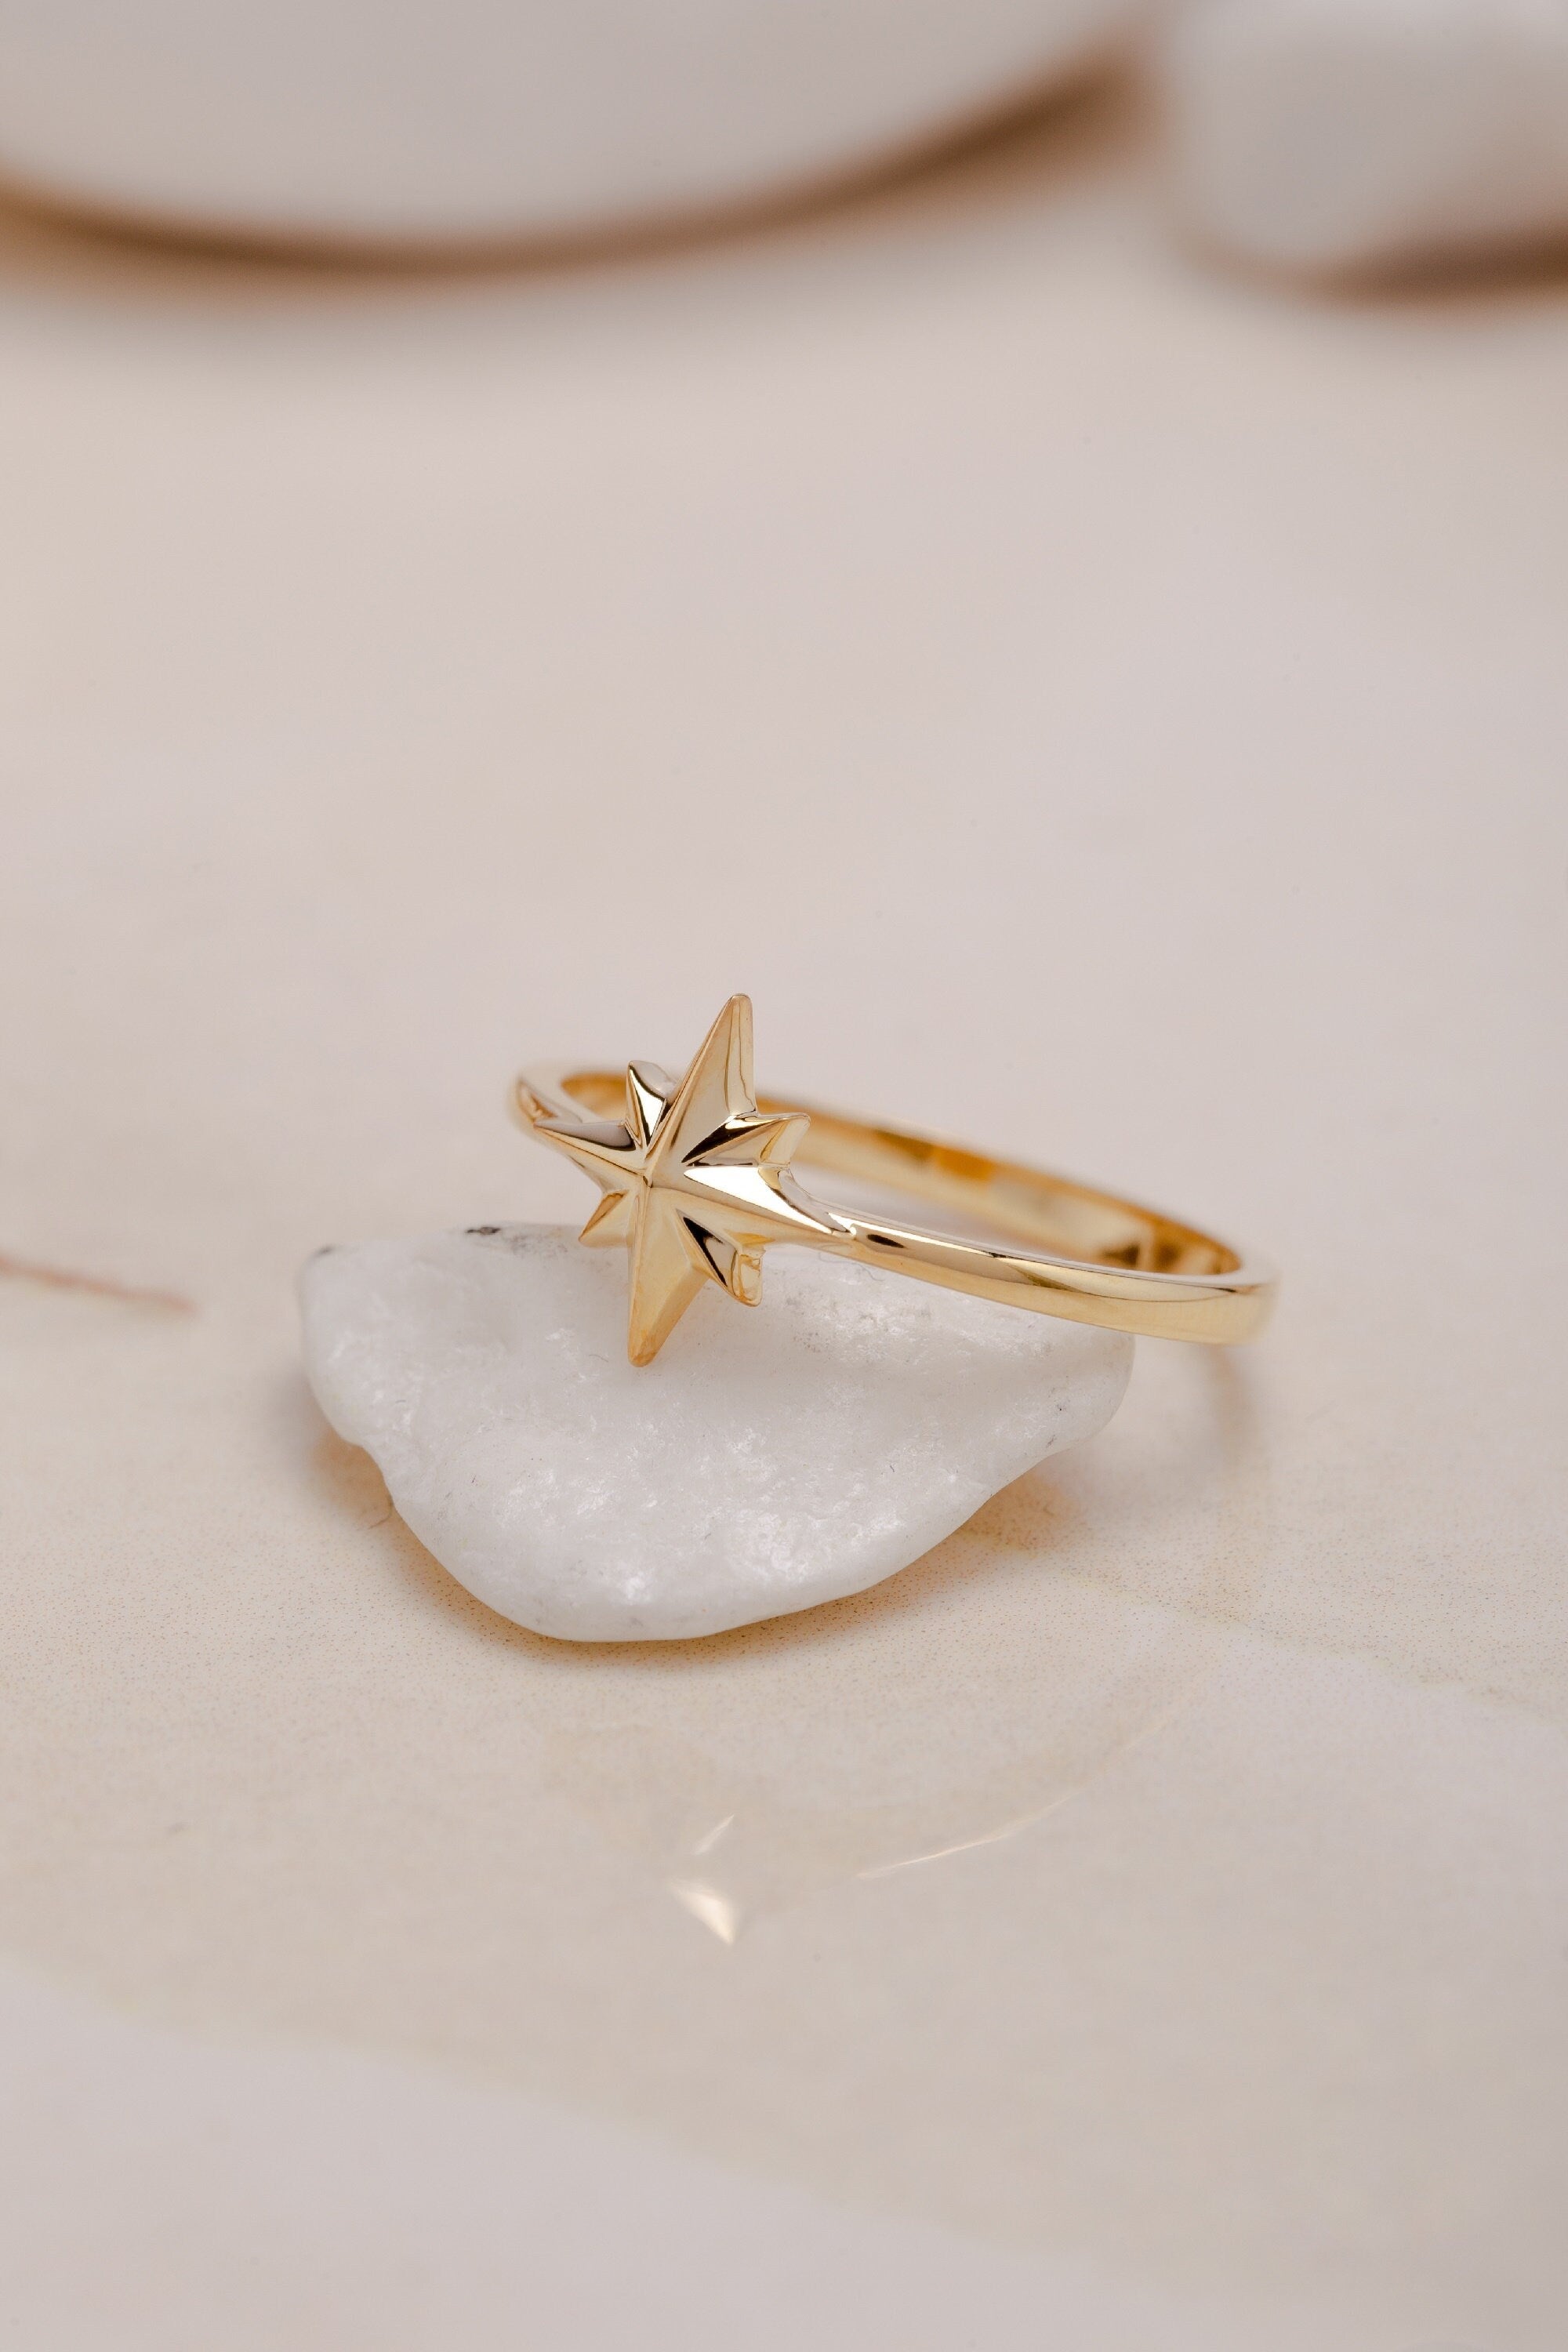 10K Gold North Star Ring, Starburst Ring, Pole Star Ring, Sterling Silver Ring, Dainty Star Ring, Gift For Mother Day, Mother Day Jewelry